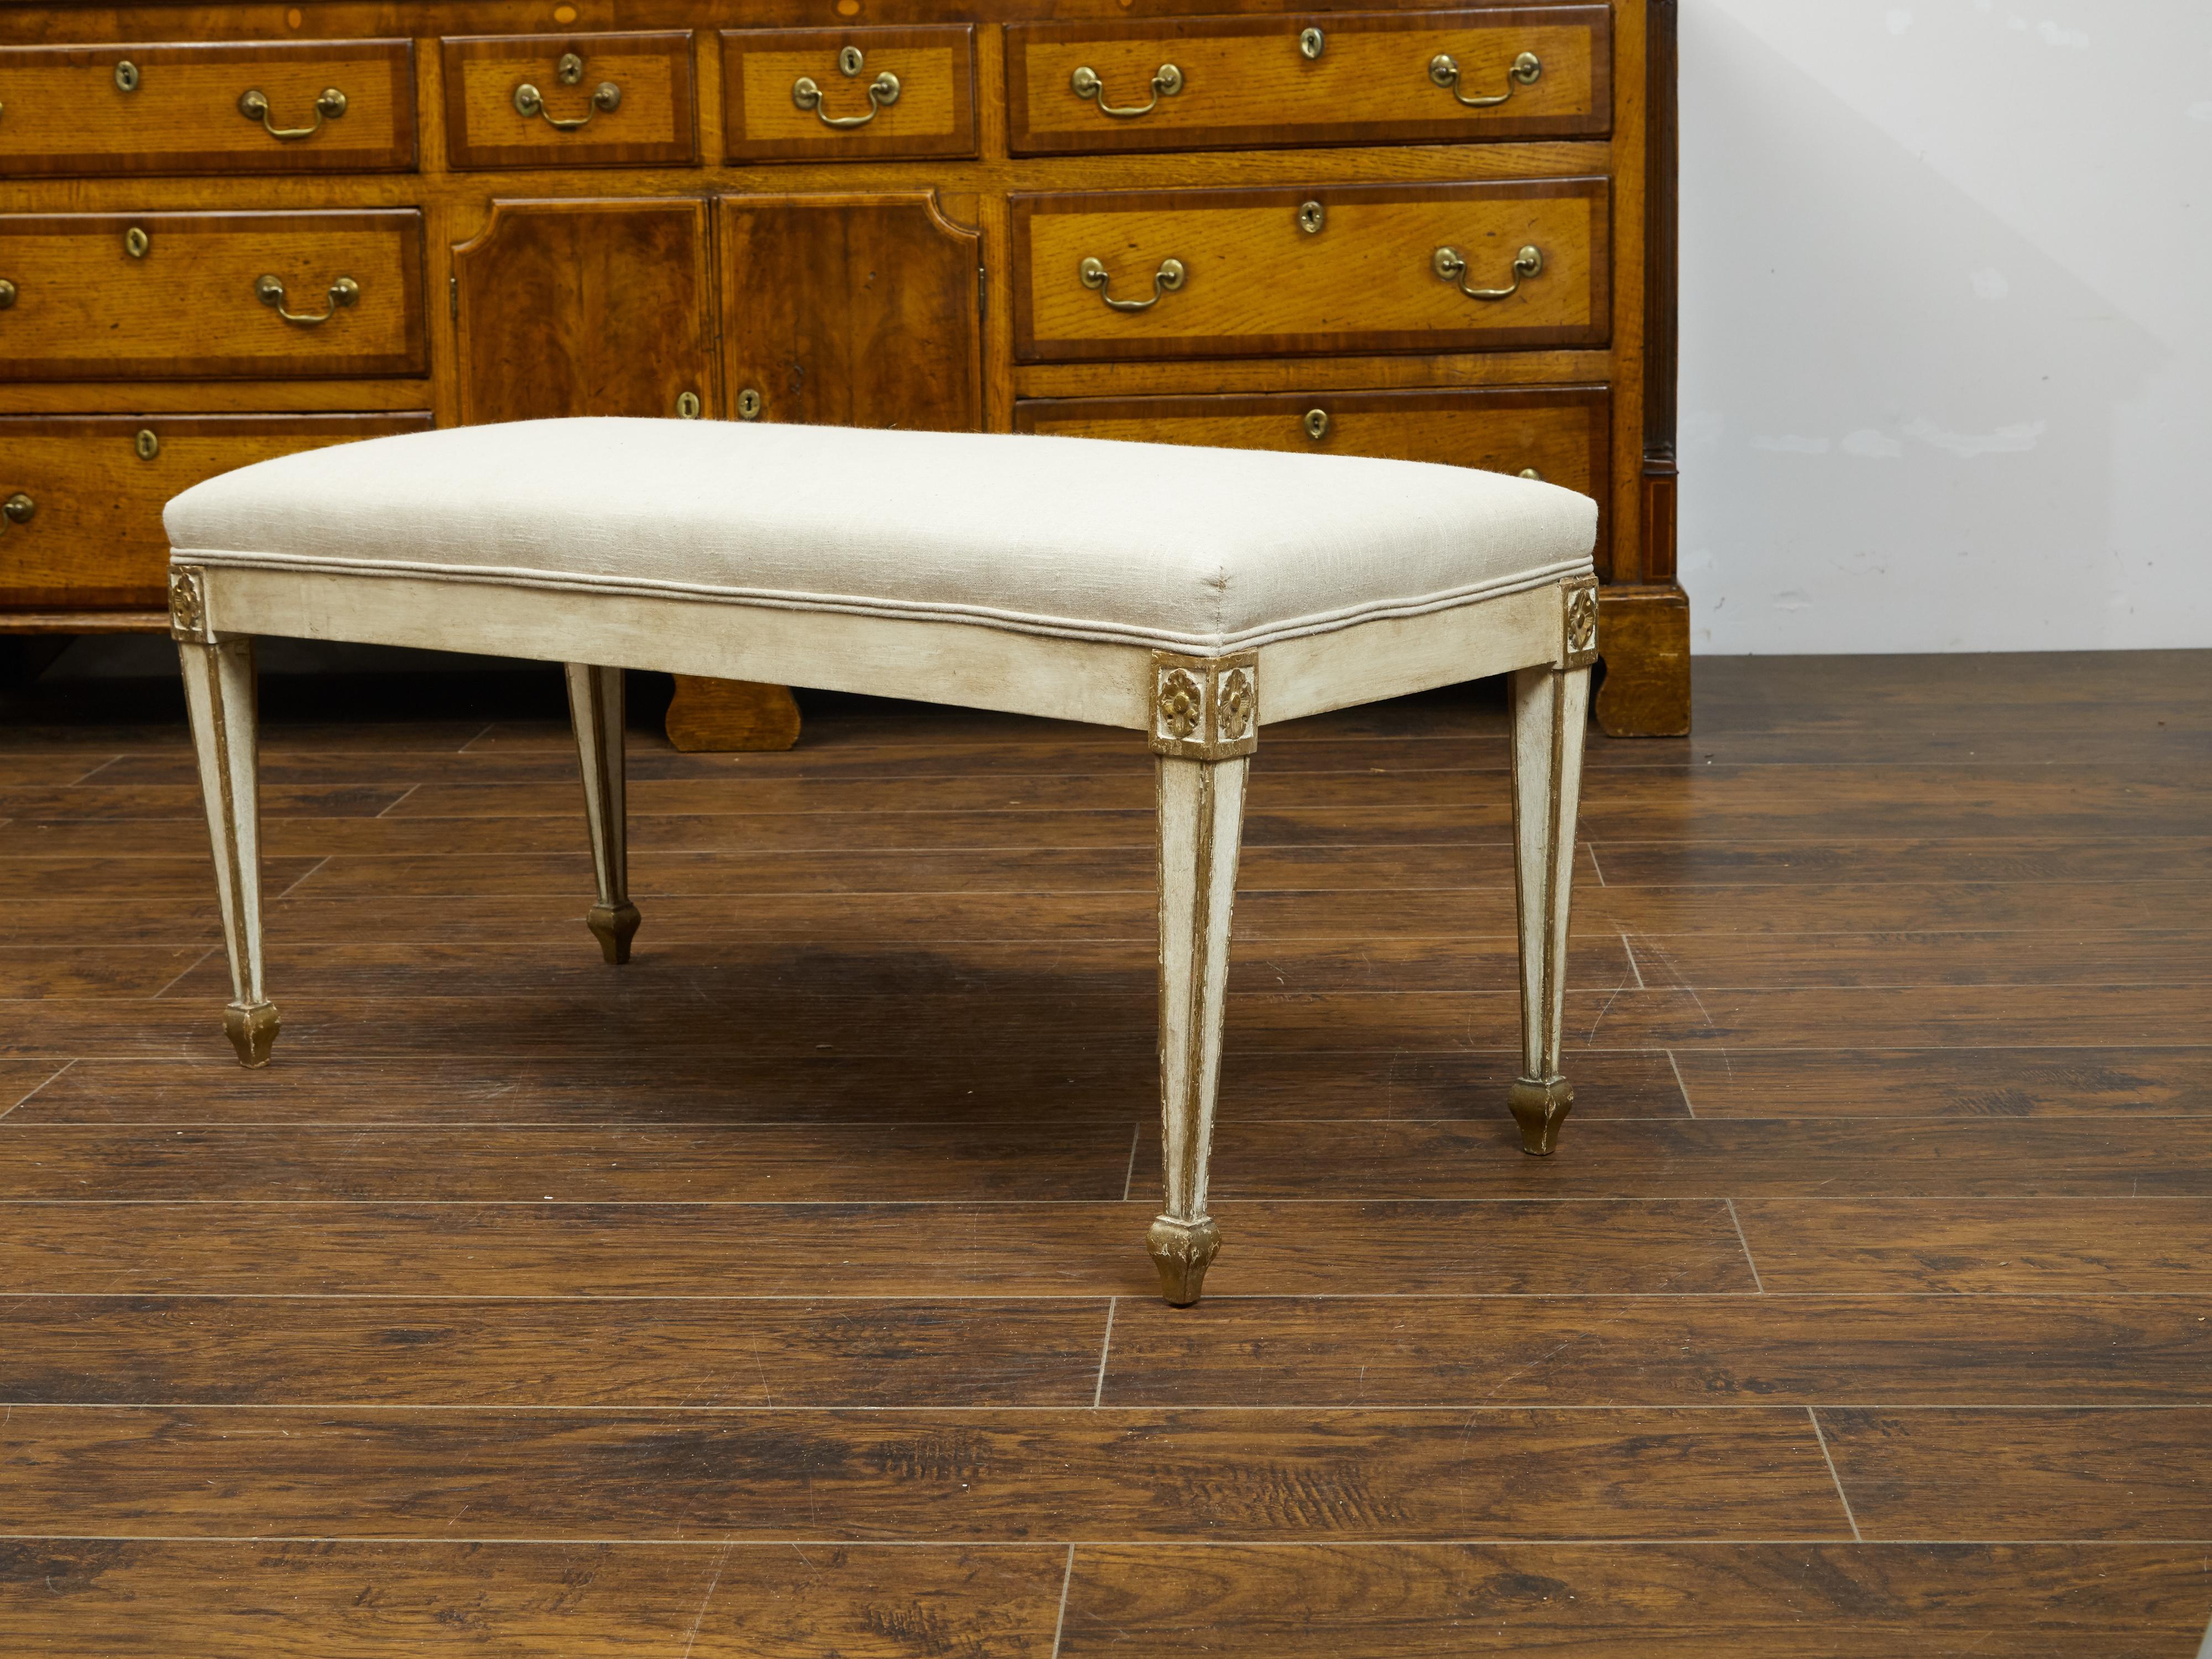 An Italian Neoclassical style painted wood bench from the 19th century, with tapered legs, carved gilded rosettes and new upholstery. We currently have two available, priced and sold $3,995 each. Created in Italy during the 19th century, this